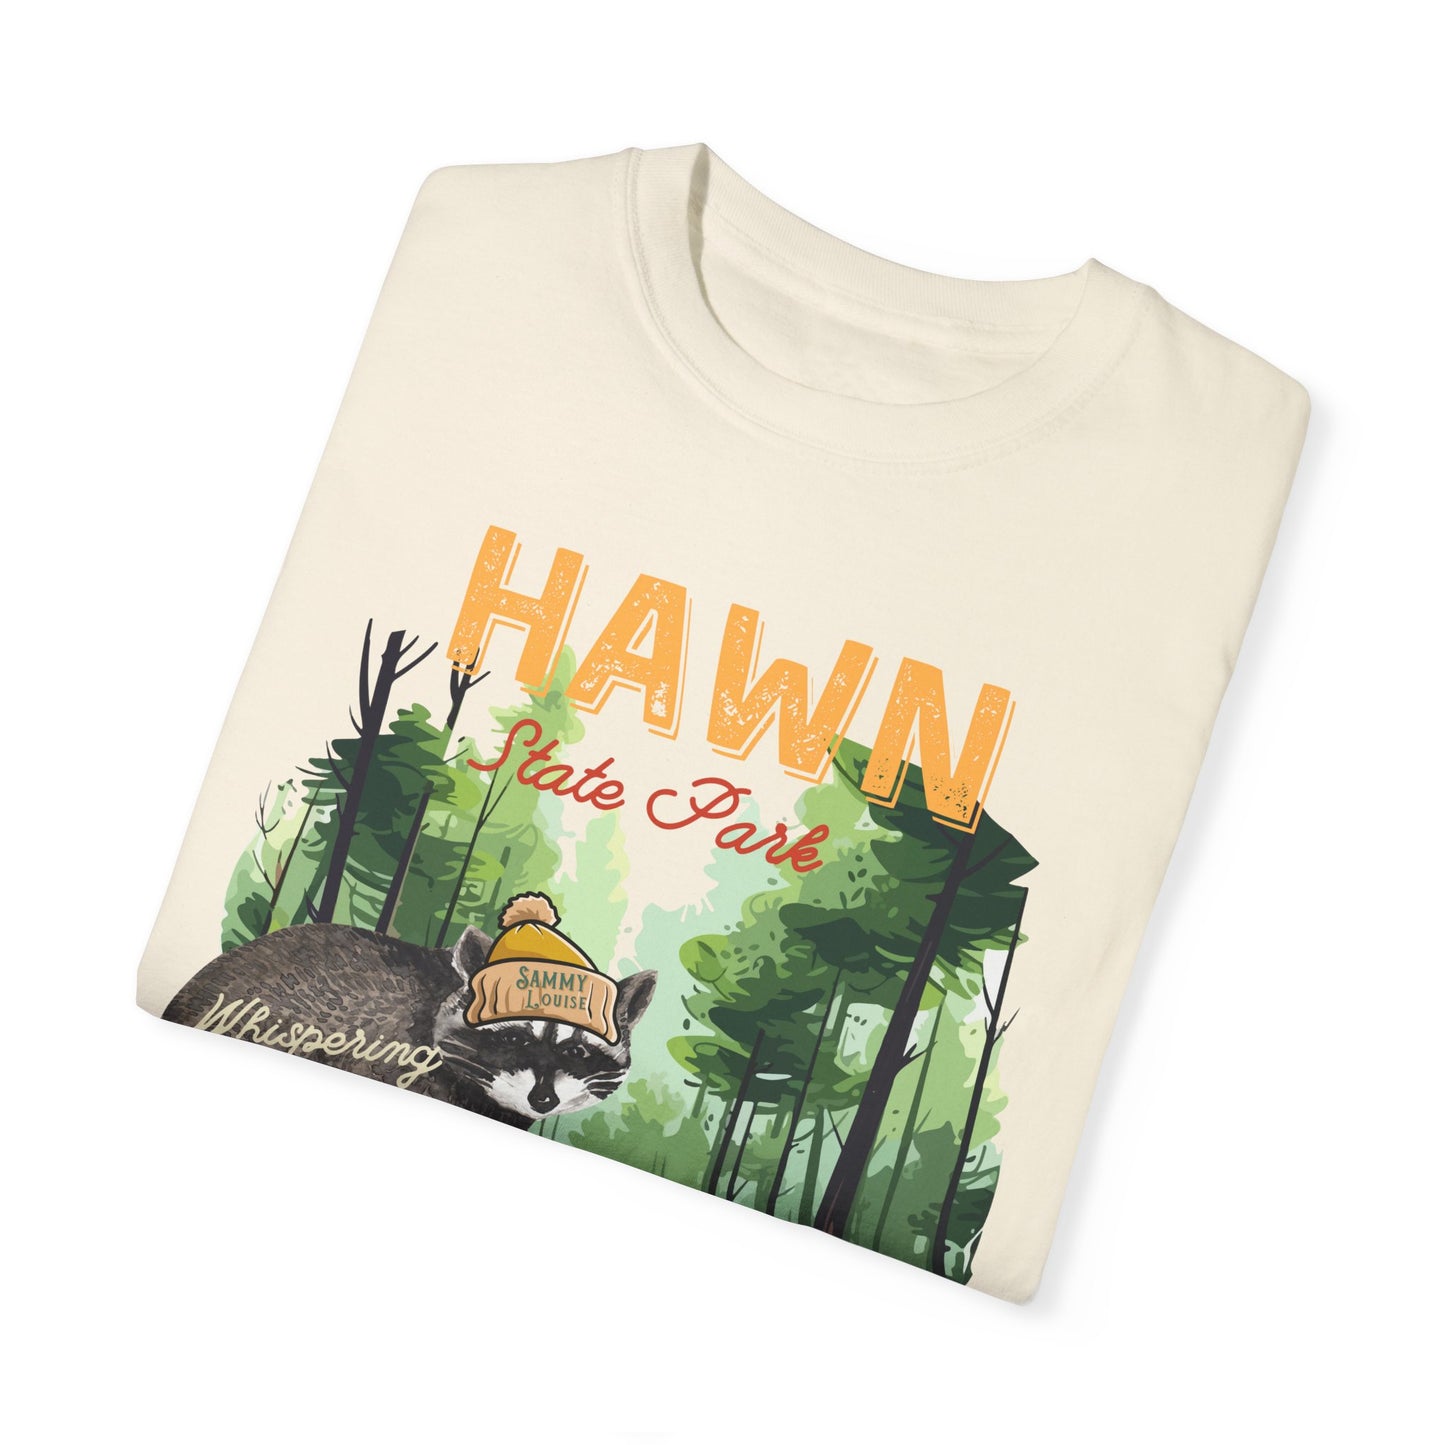 Hawn State Park Unisex Garment-Dyed T-shirt